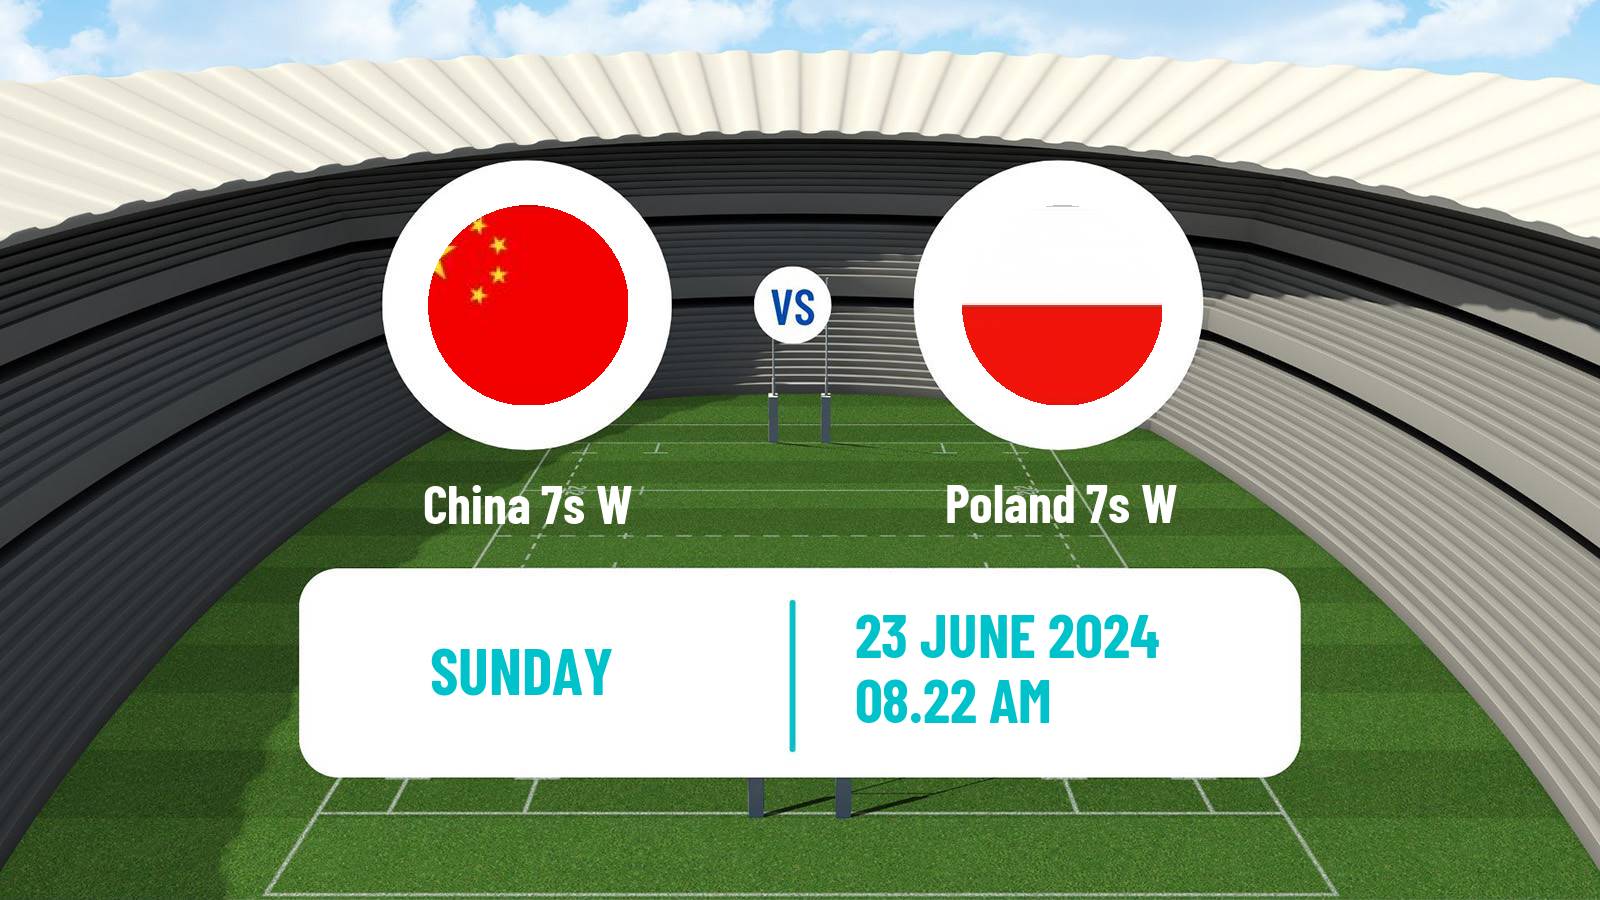 Rugby union Olympic Games 7s Rugby Women China 7s W - Poland 7s W